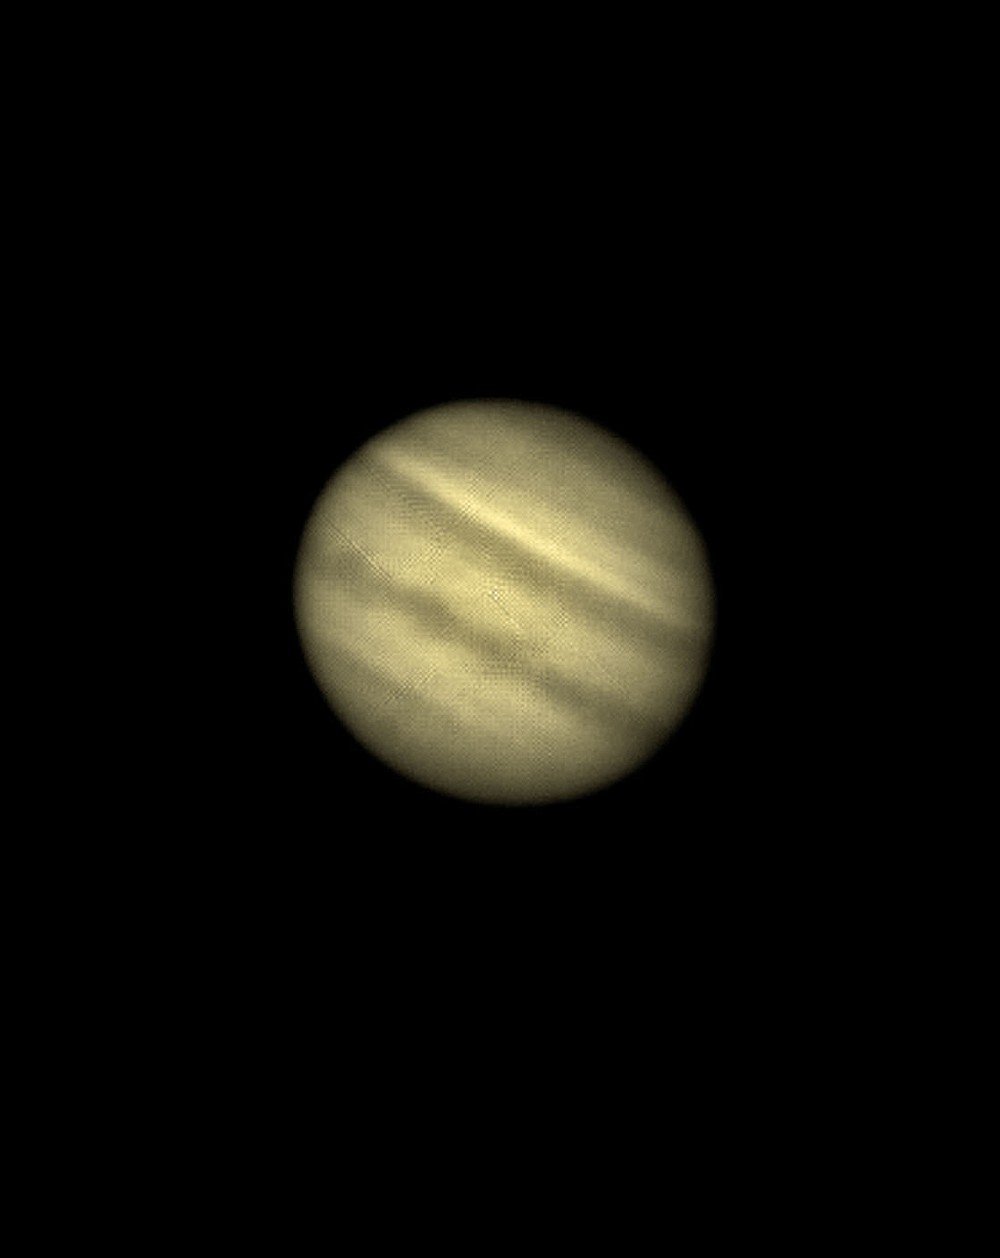 David Cater/Star-Gazing
Jupiter is the largest planet in our solar system.